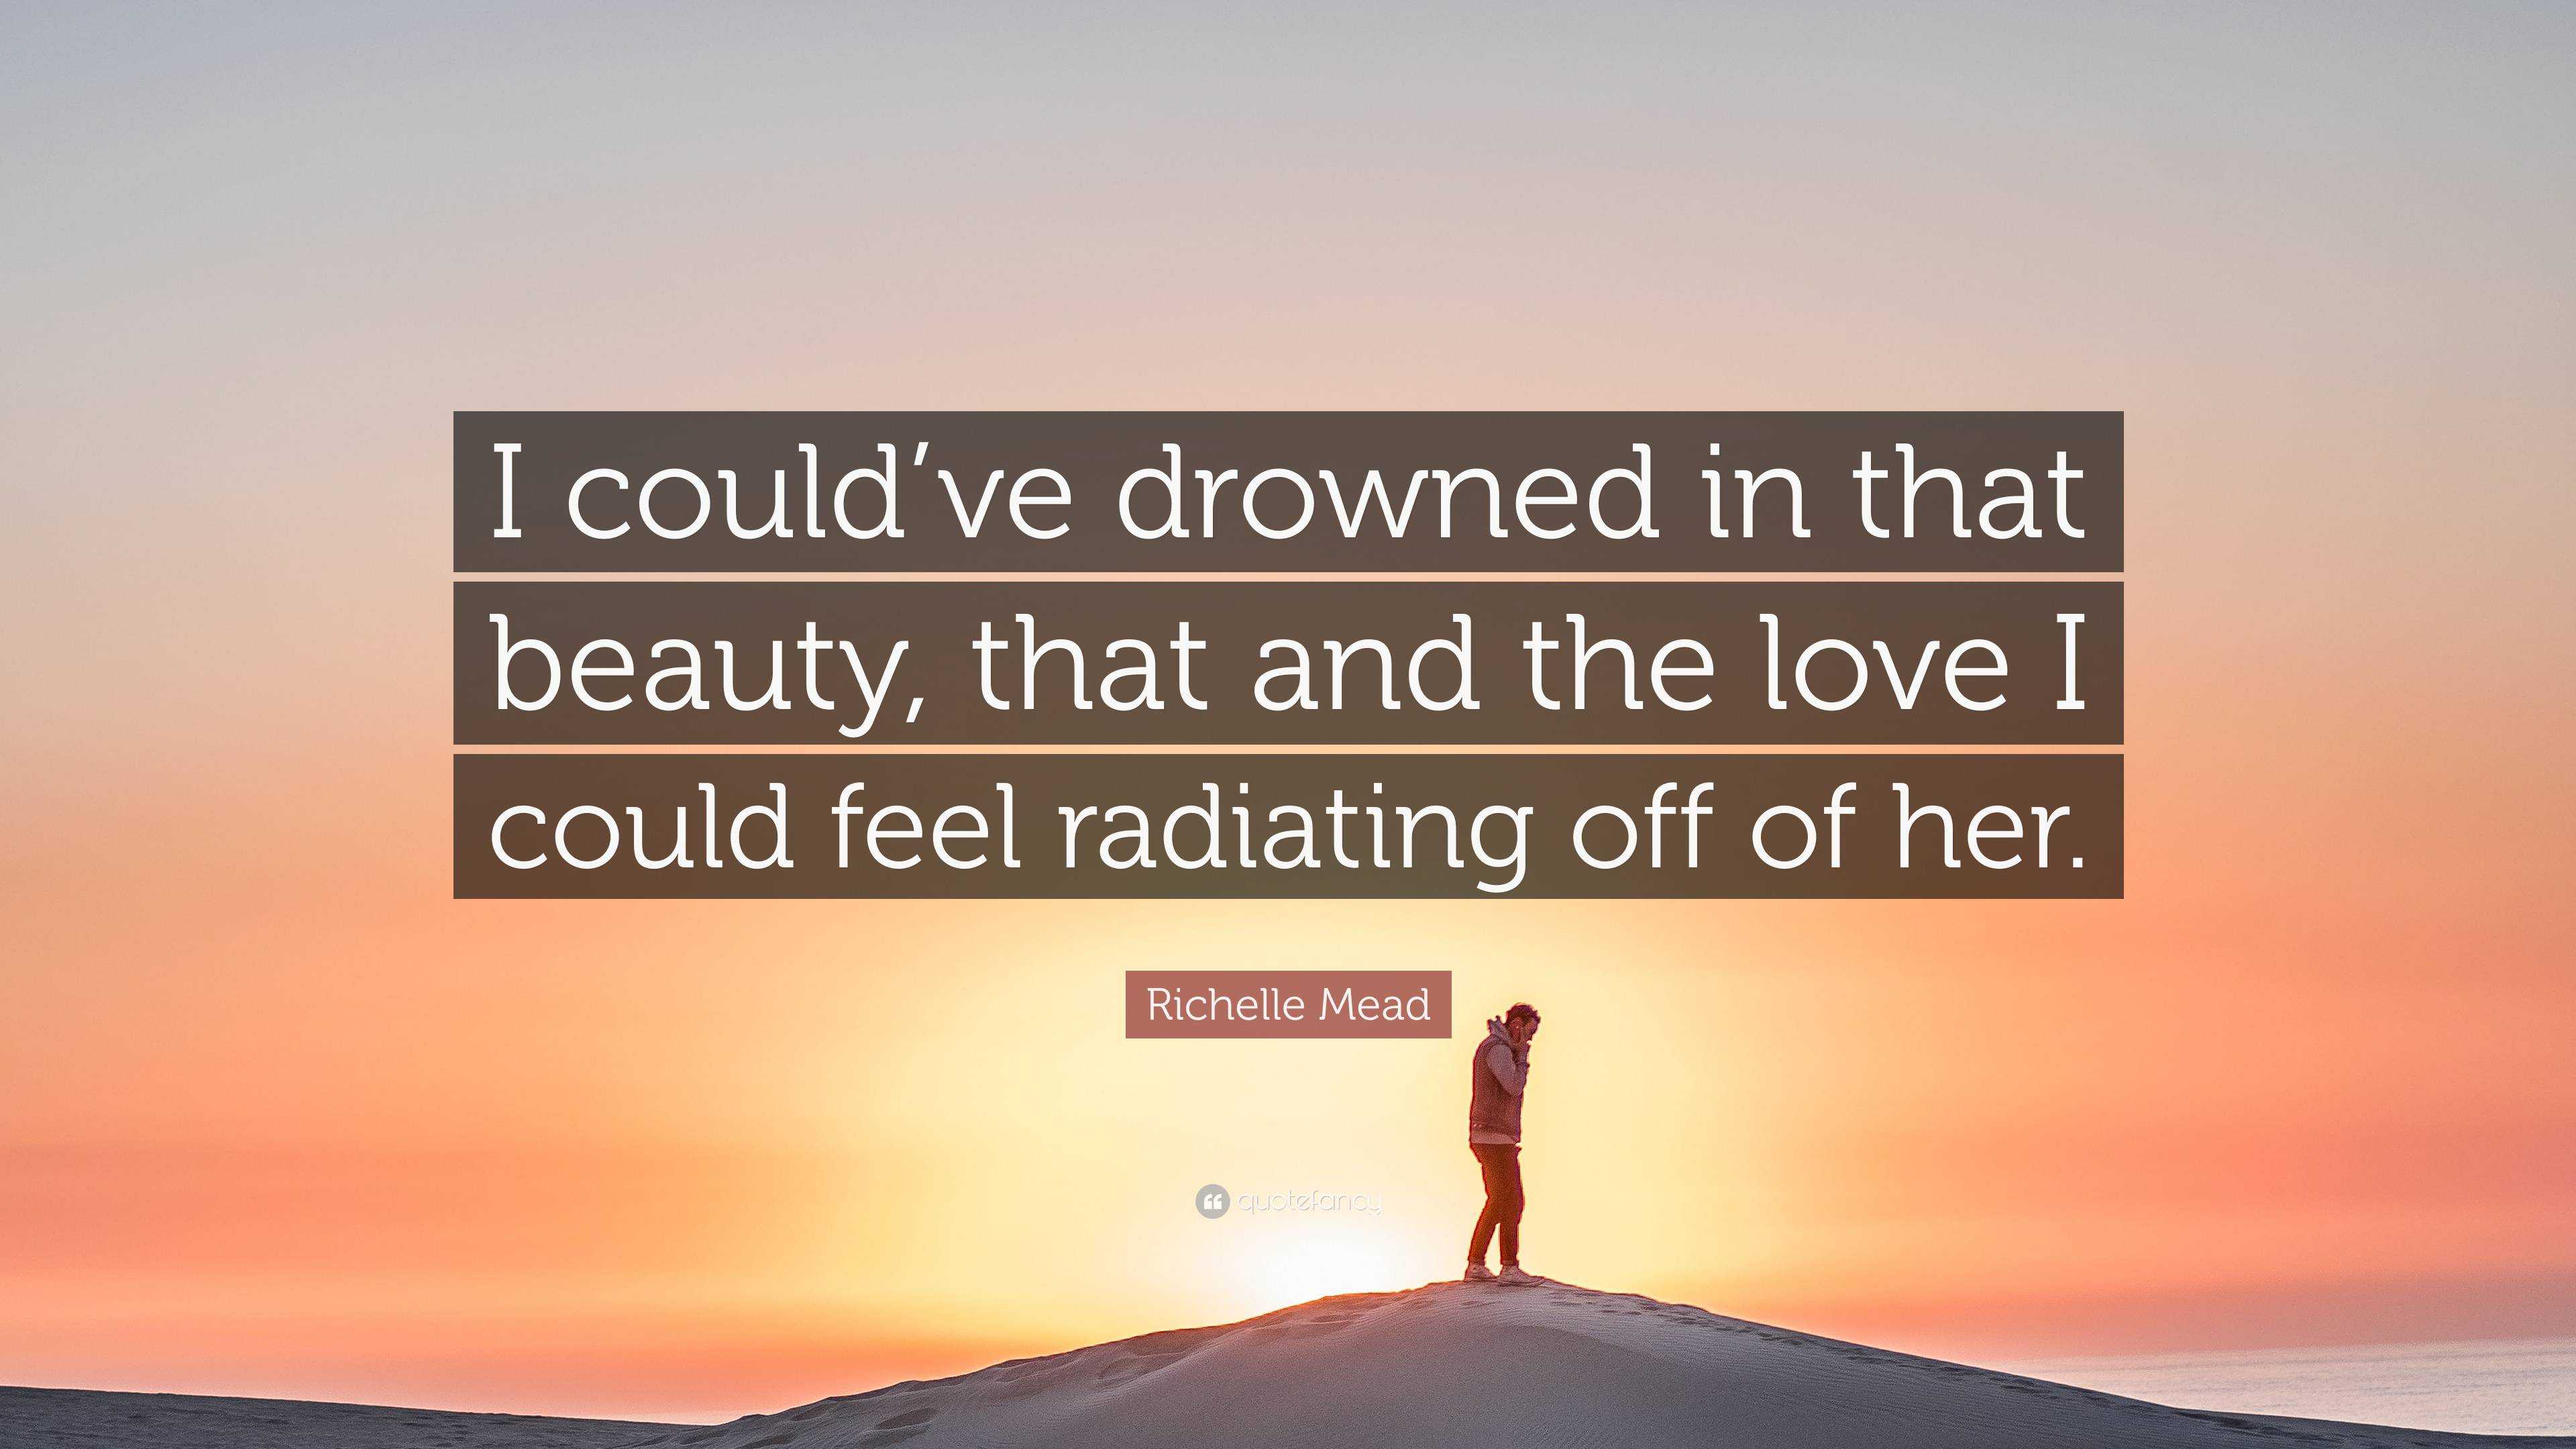 Richelle Mead Quote: “I could’ve drowned in that beauty, that and the ...